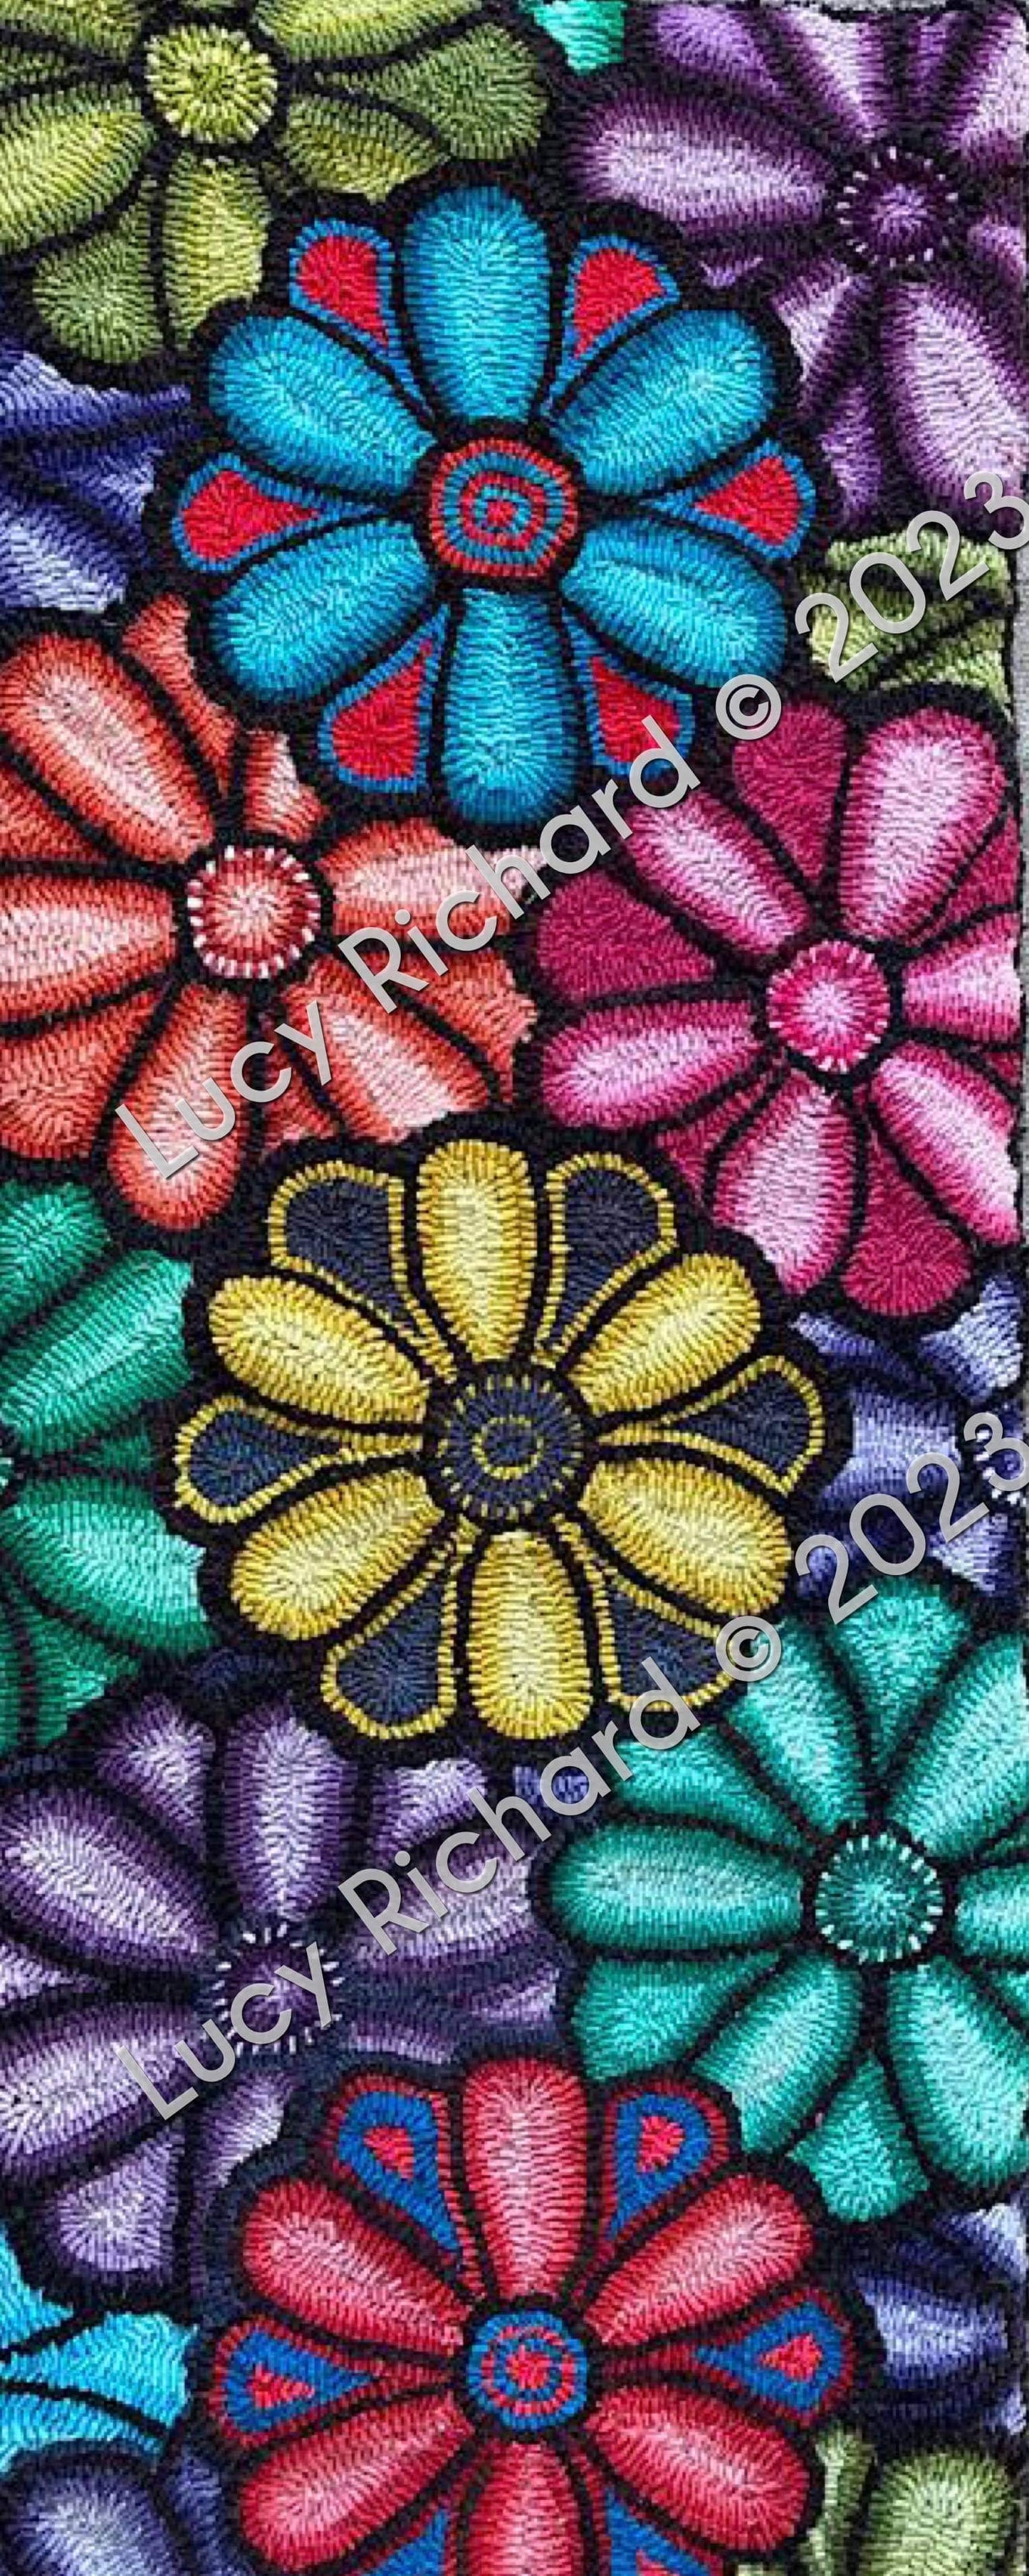 Flower Power designed by Lucy Richard on LINEN  - (no tax) Canadian Dollars